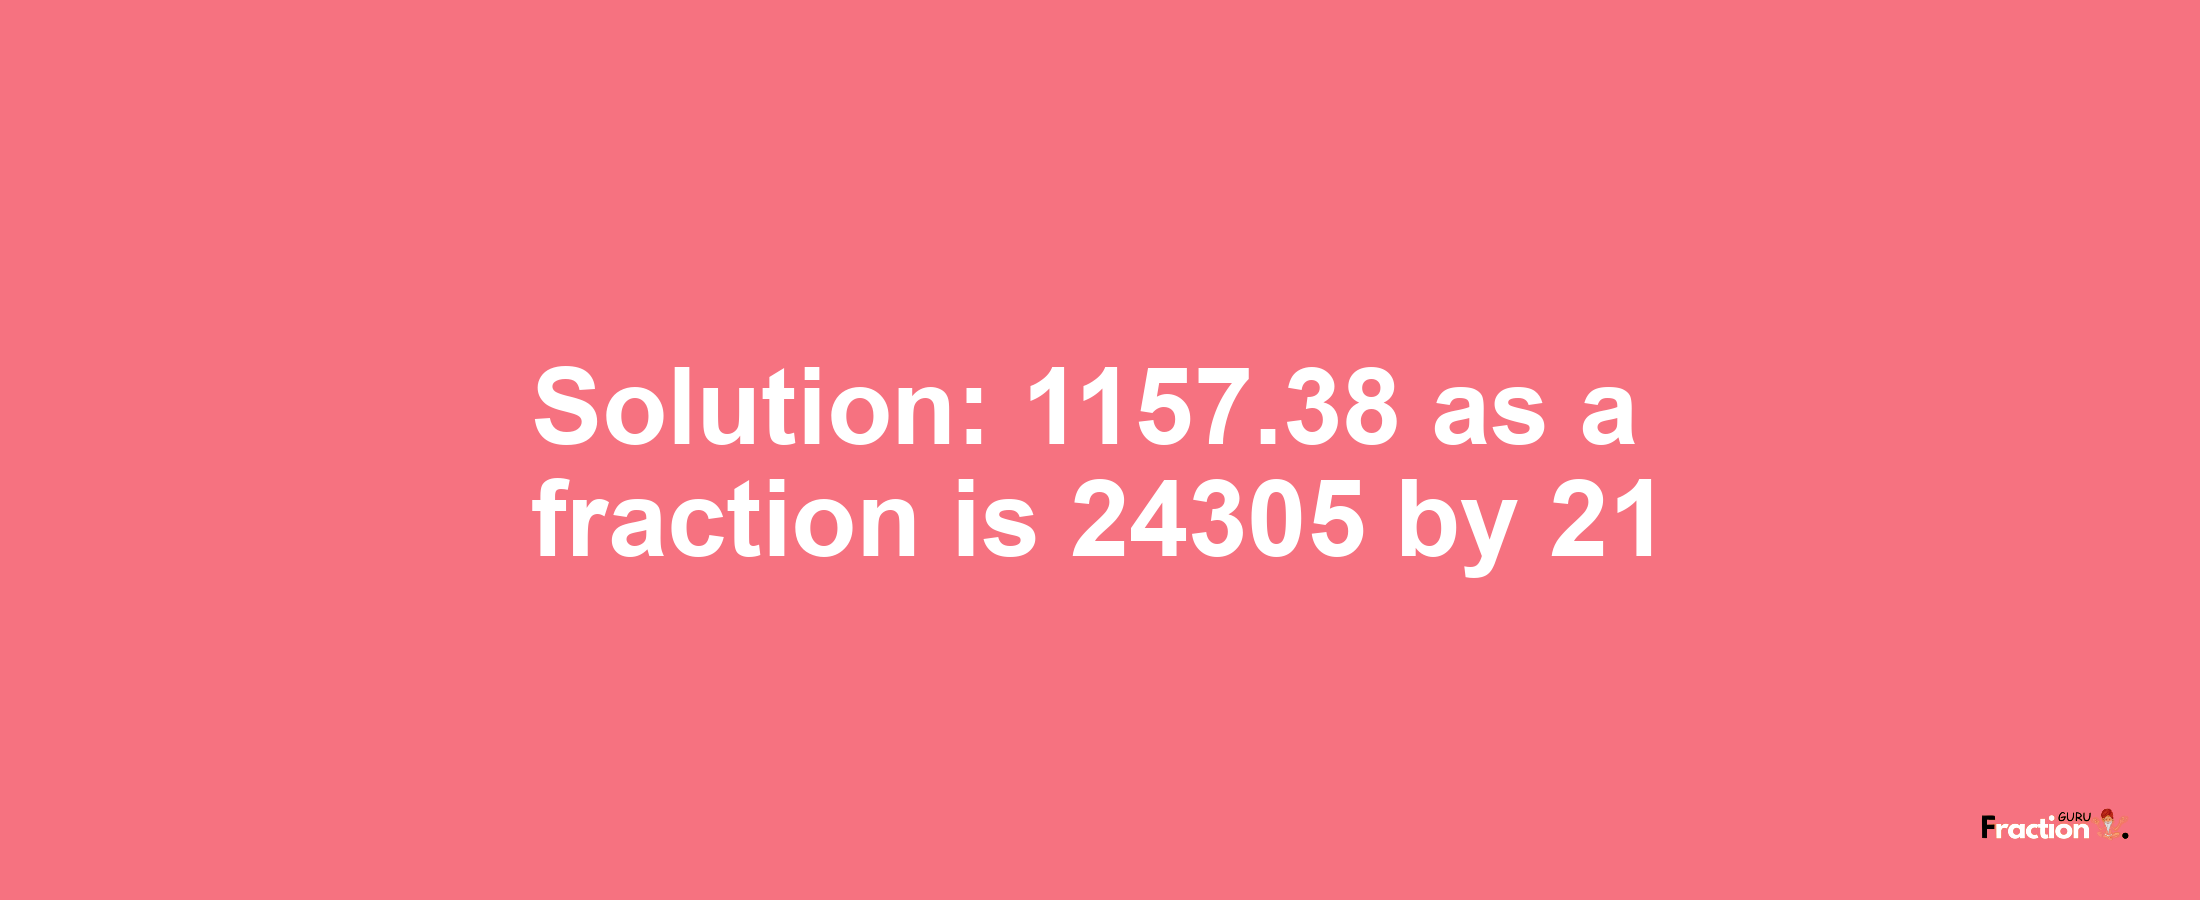 Solution:1157.38 as a fraction is 24305/21